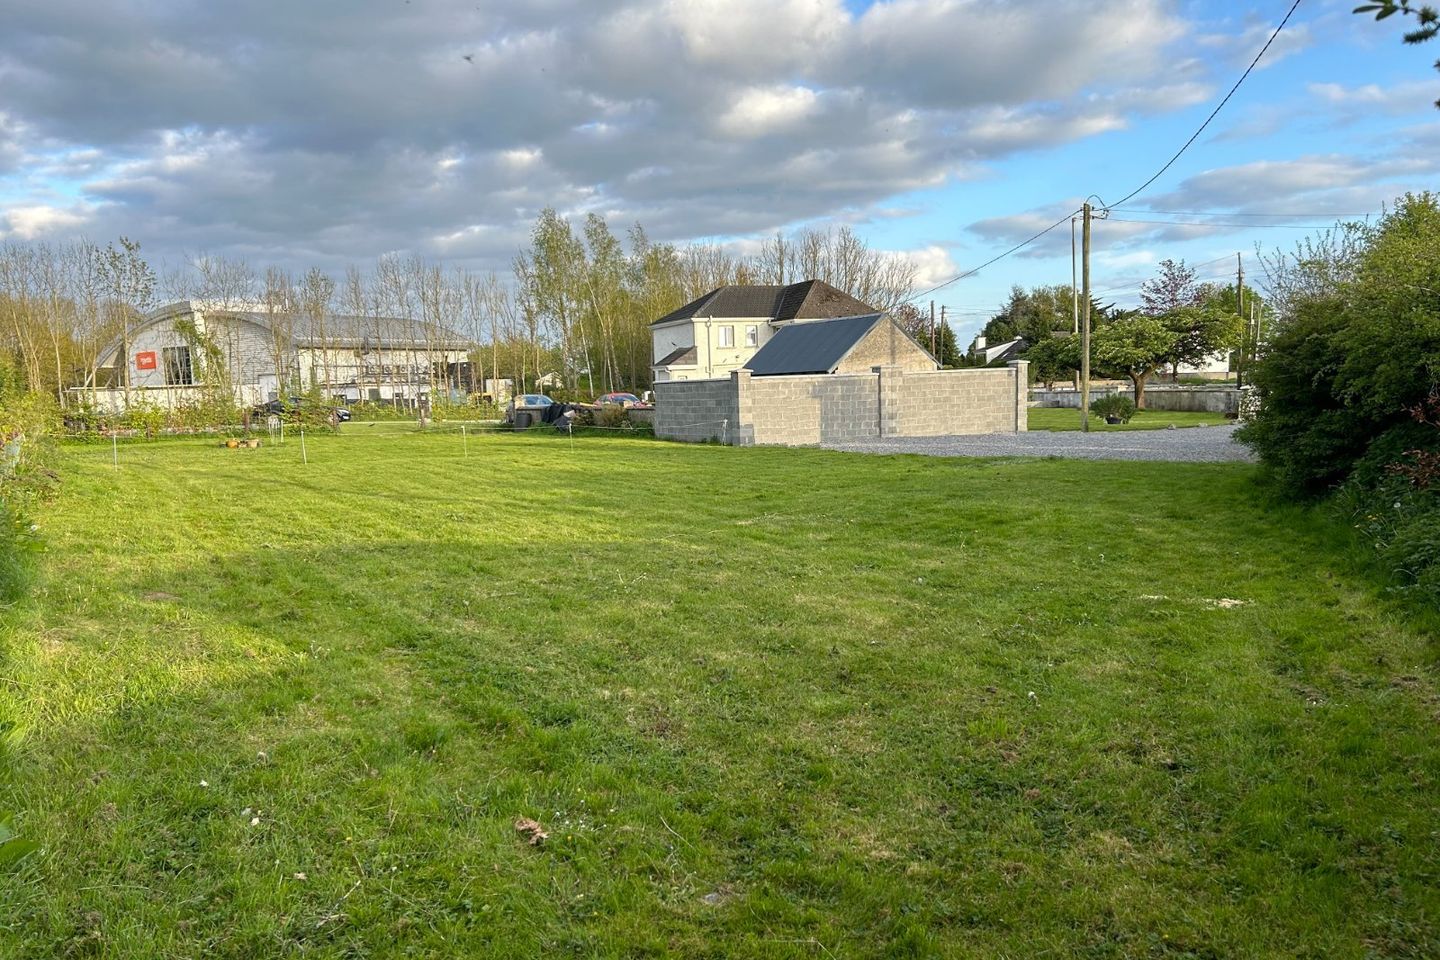 Srah Road, Tullamore, Co. Offaly